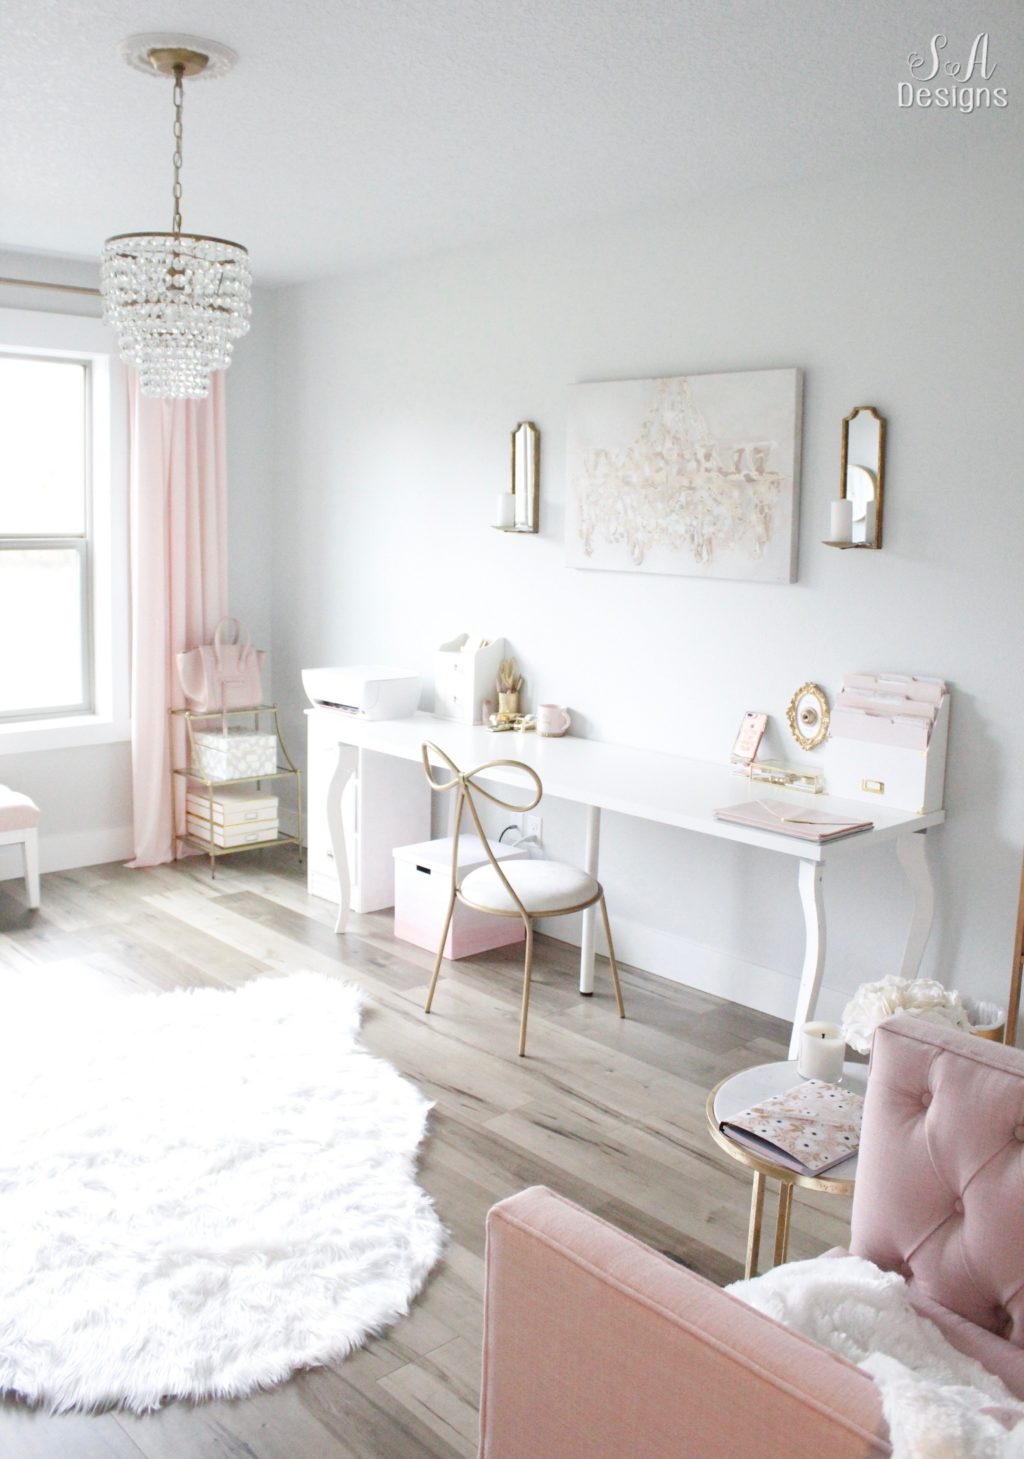 Updated Glam Office Reveal With Blush Pink Walls - Summer Adams